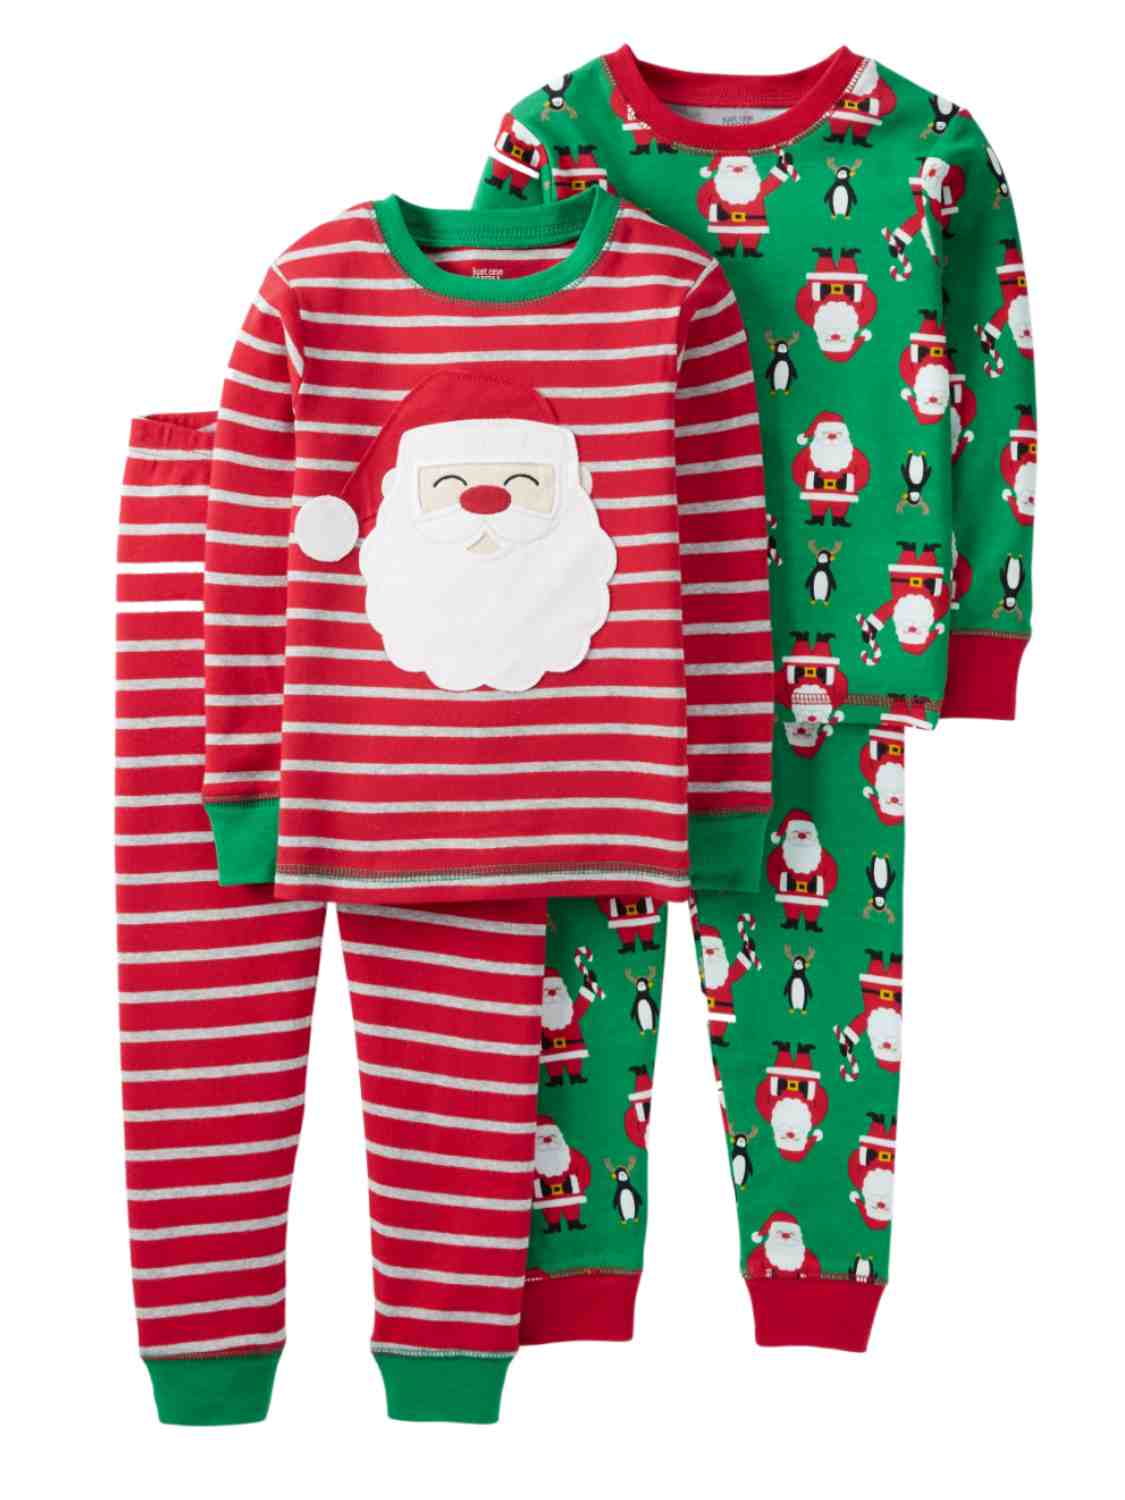 Details about   NWT Toddler Carters 2 Santa Fleece Sleepers 18 Mo 3T Christmas Holiday Boy PJs 